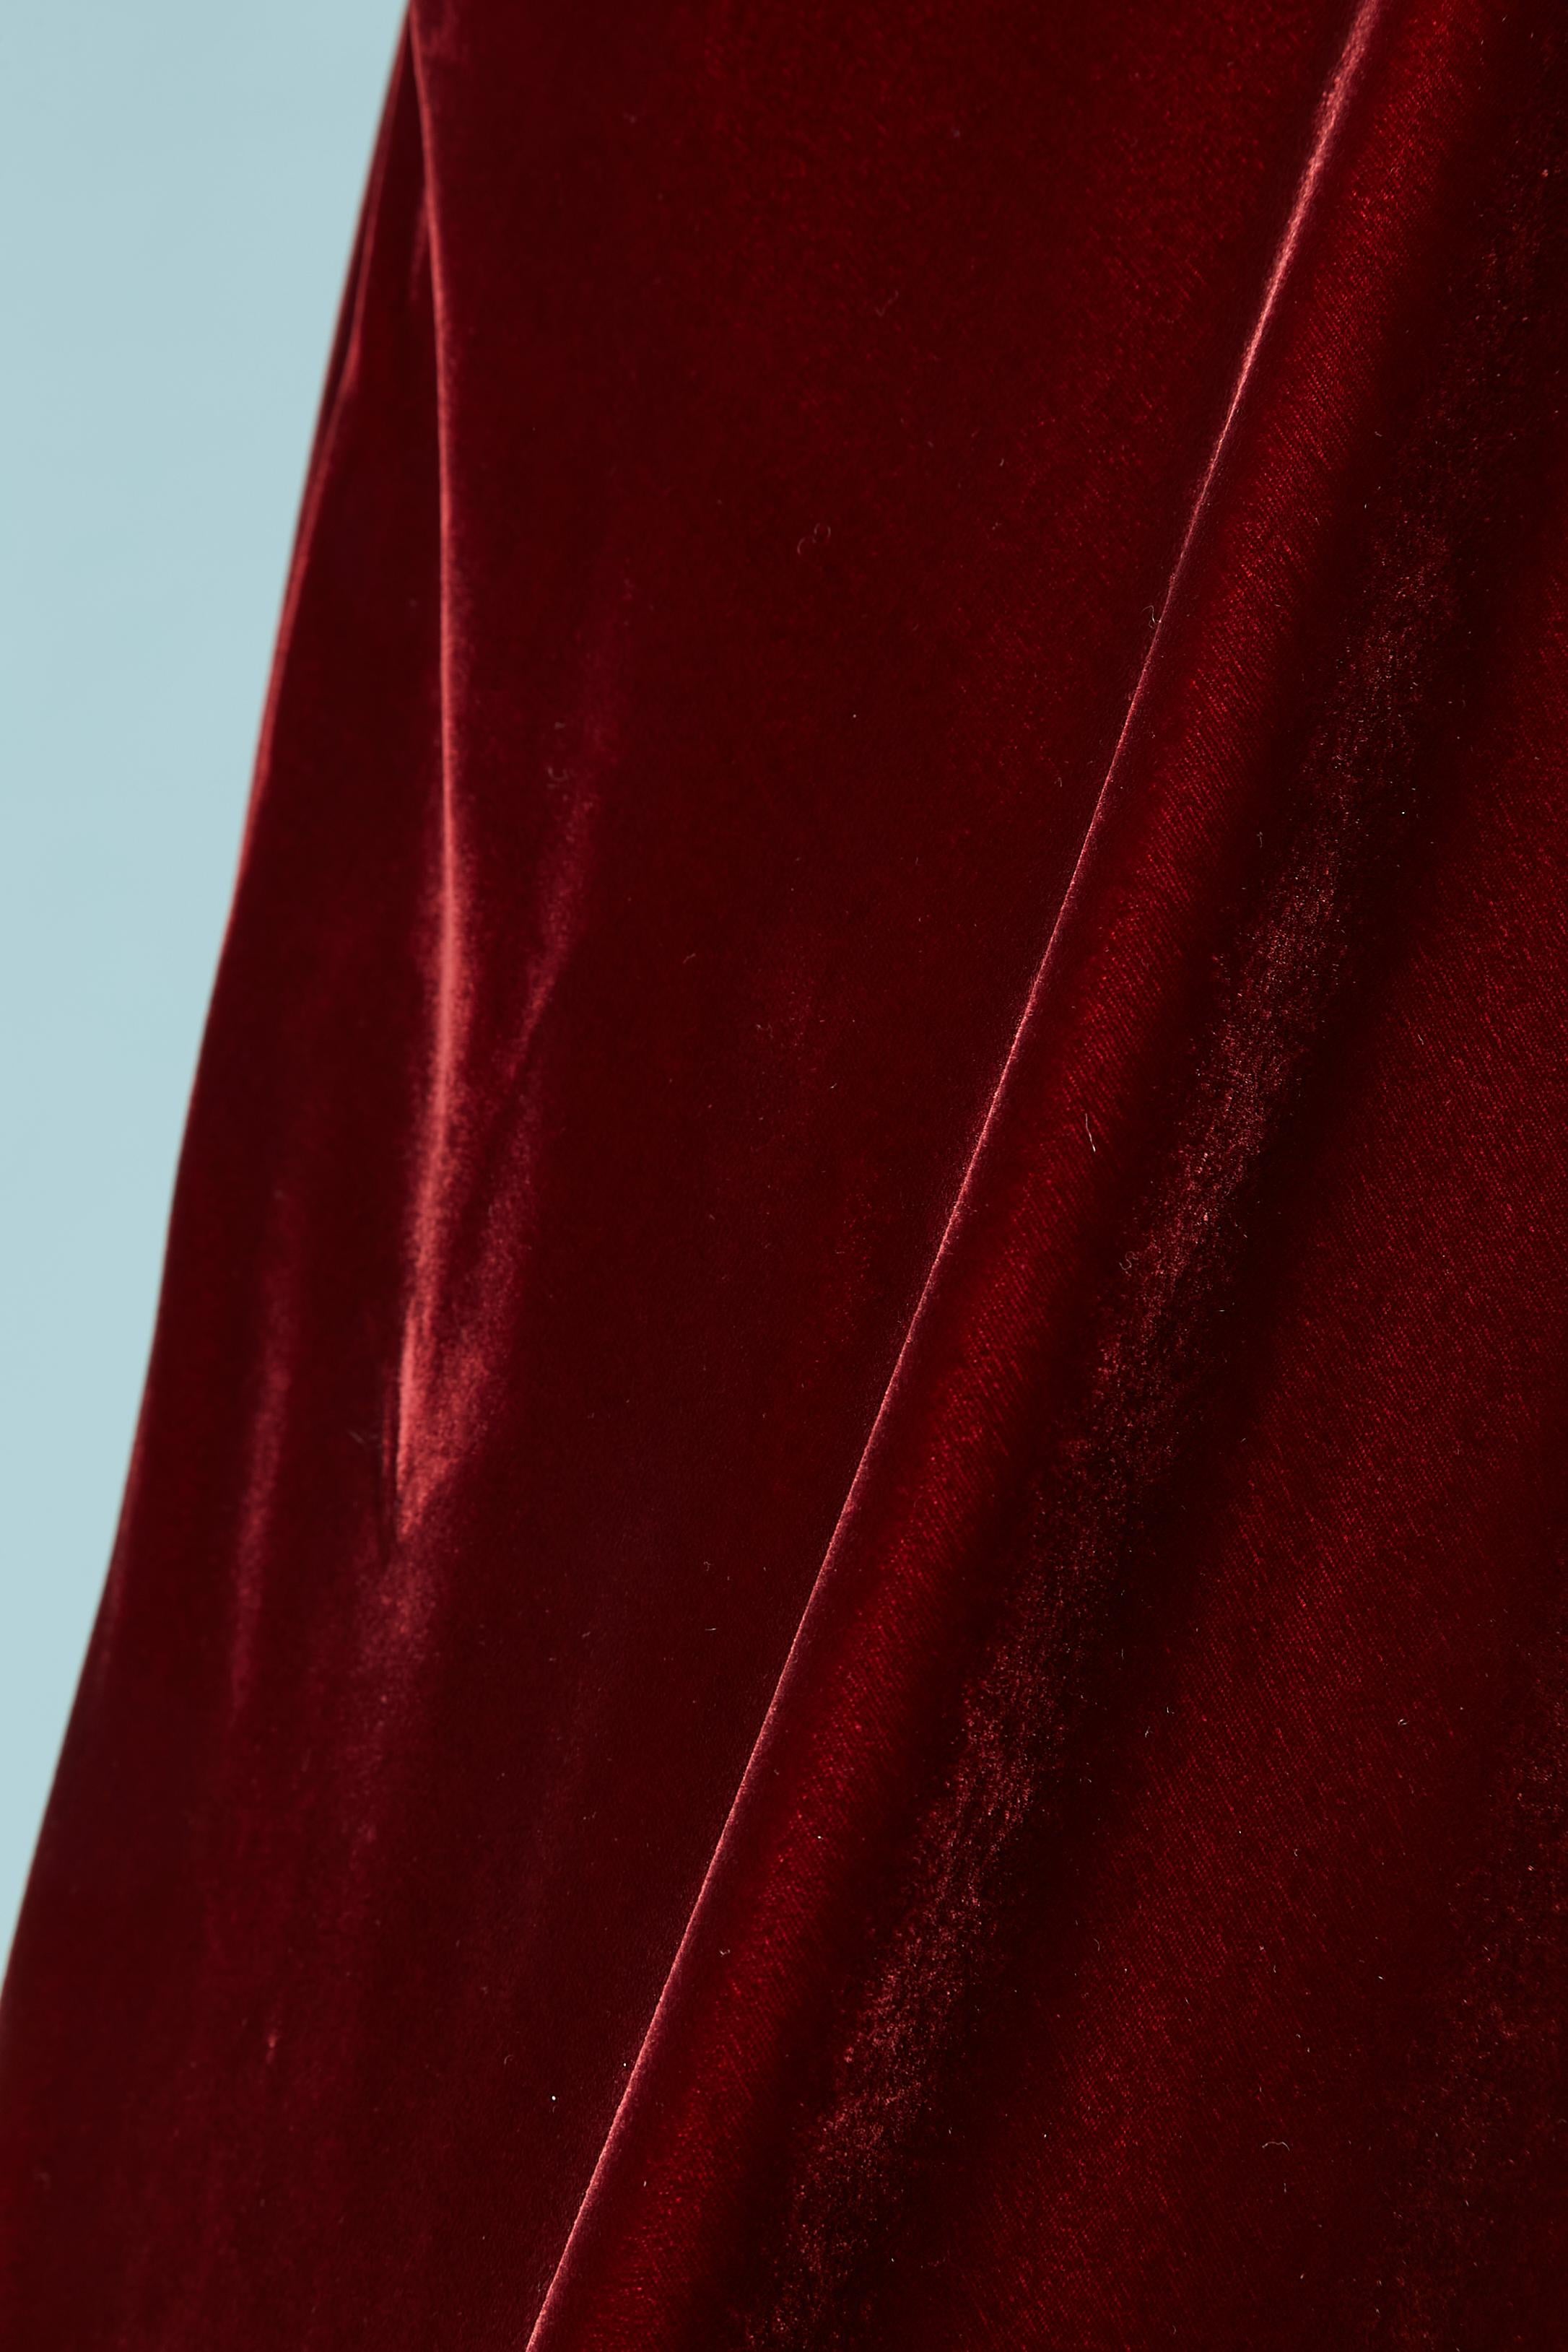 Long burgundy velvet skirt. Velvet composition: 82% rayon, 18% silk. No indication about the lining composition but probably acetate. 
Zip and hook&eye closure on the left side 
SIZE 10 (us) 